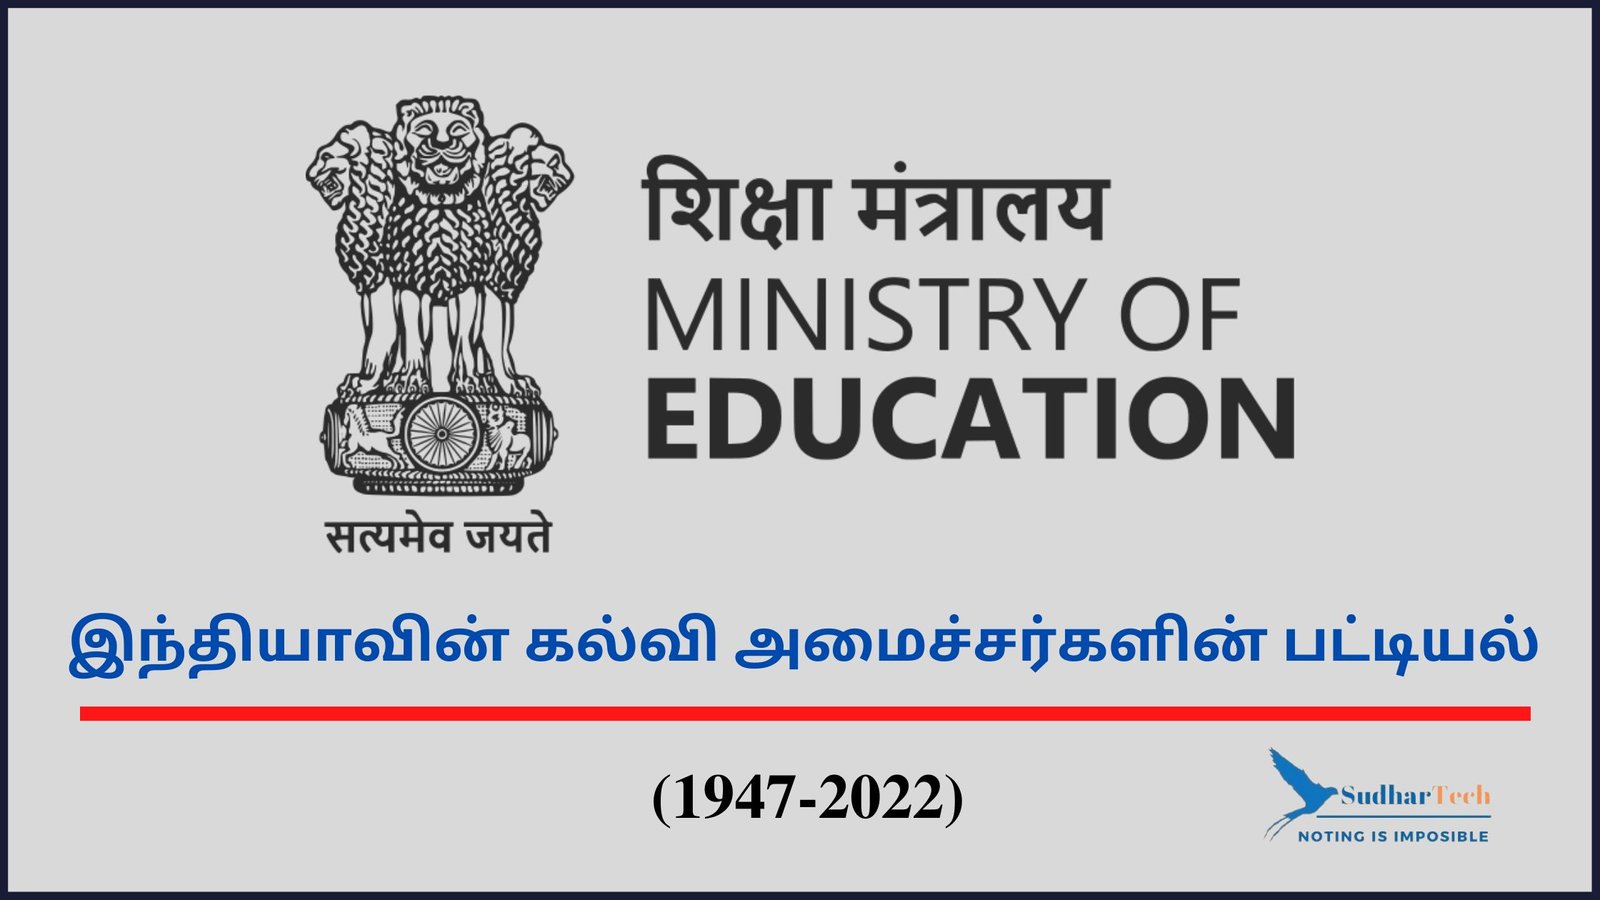 Education Ministers of India in tamil